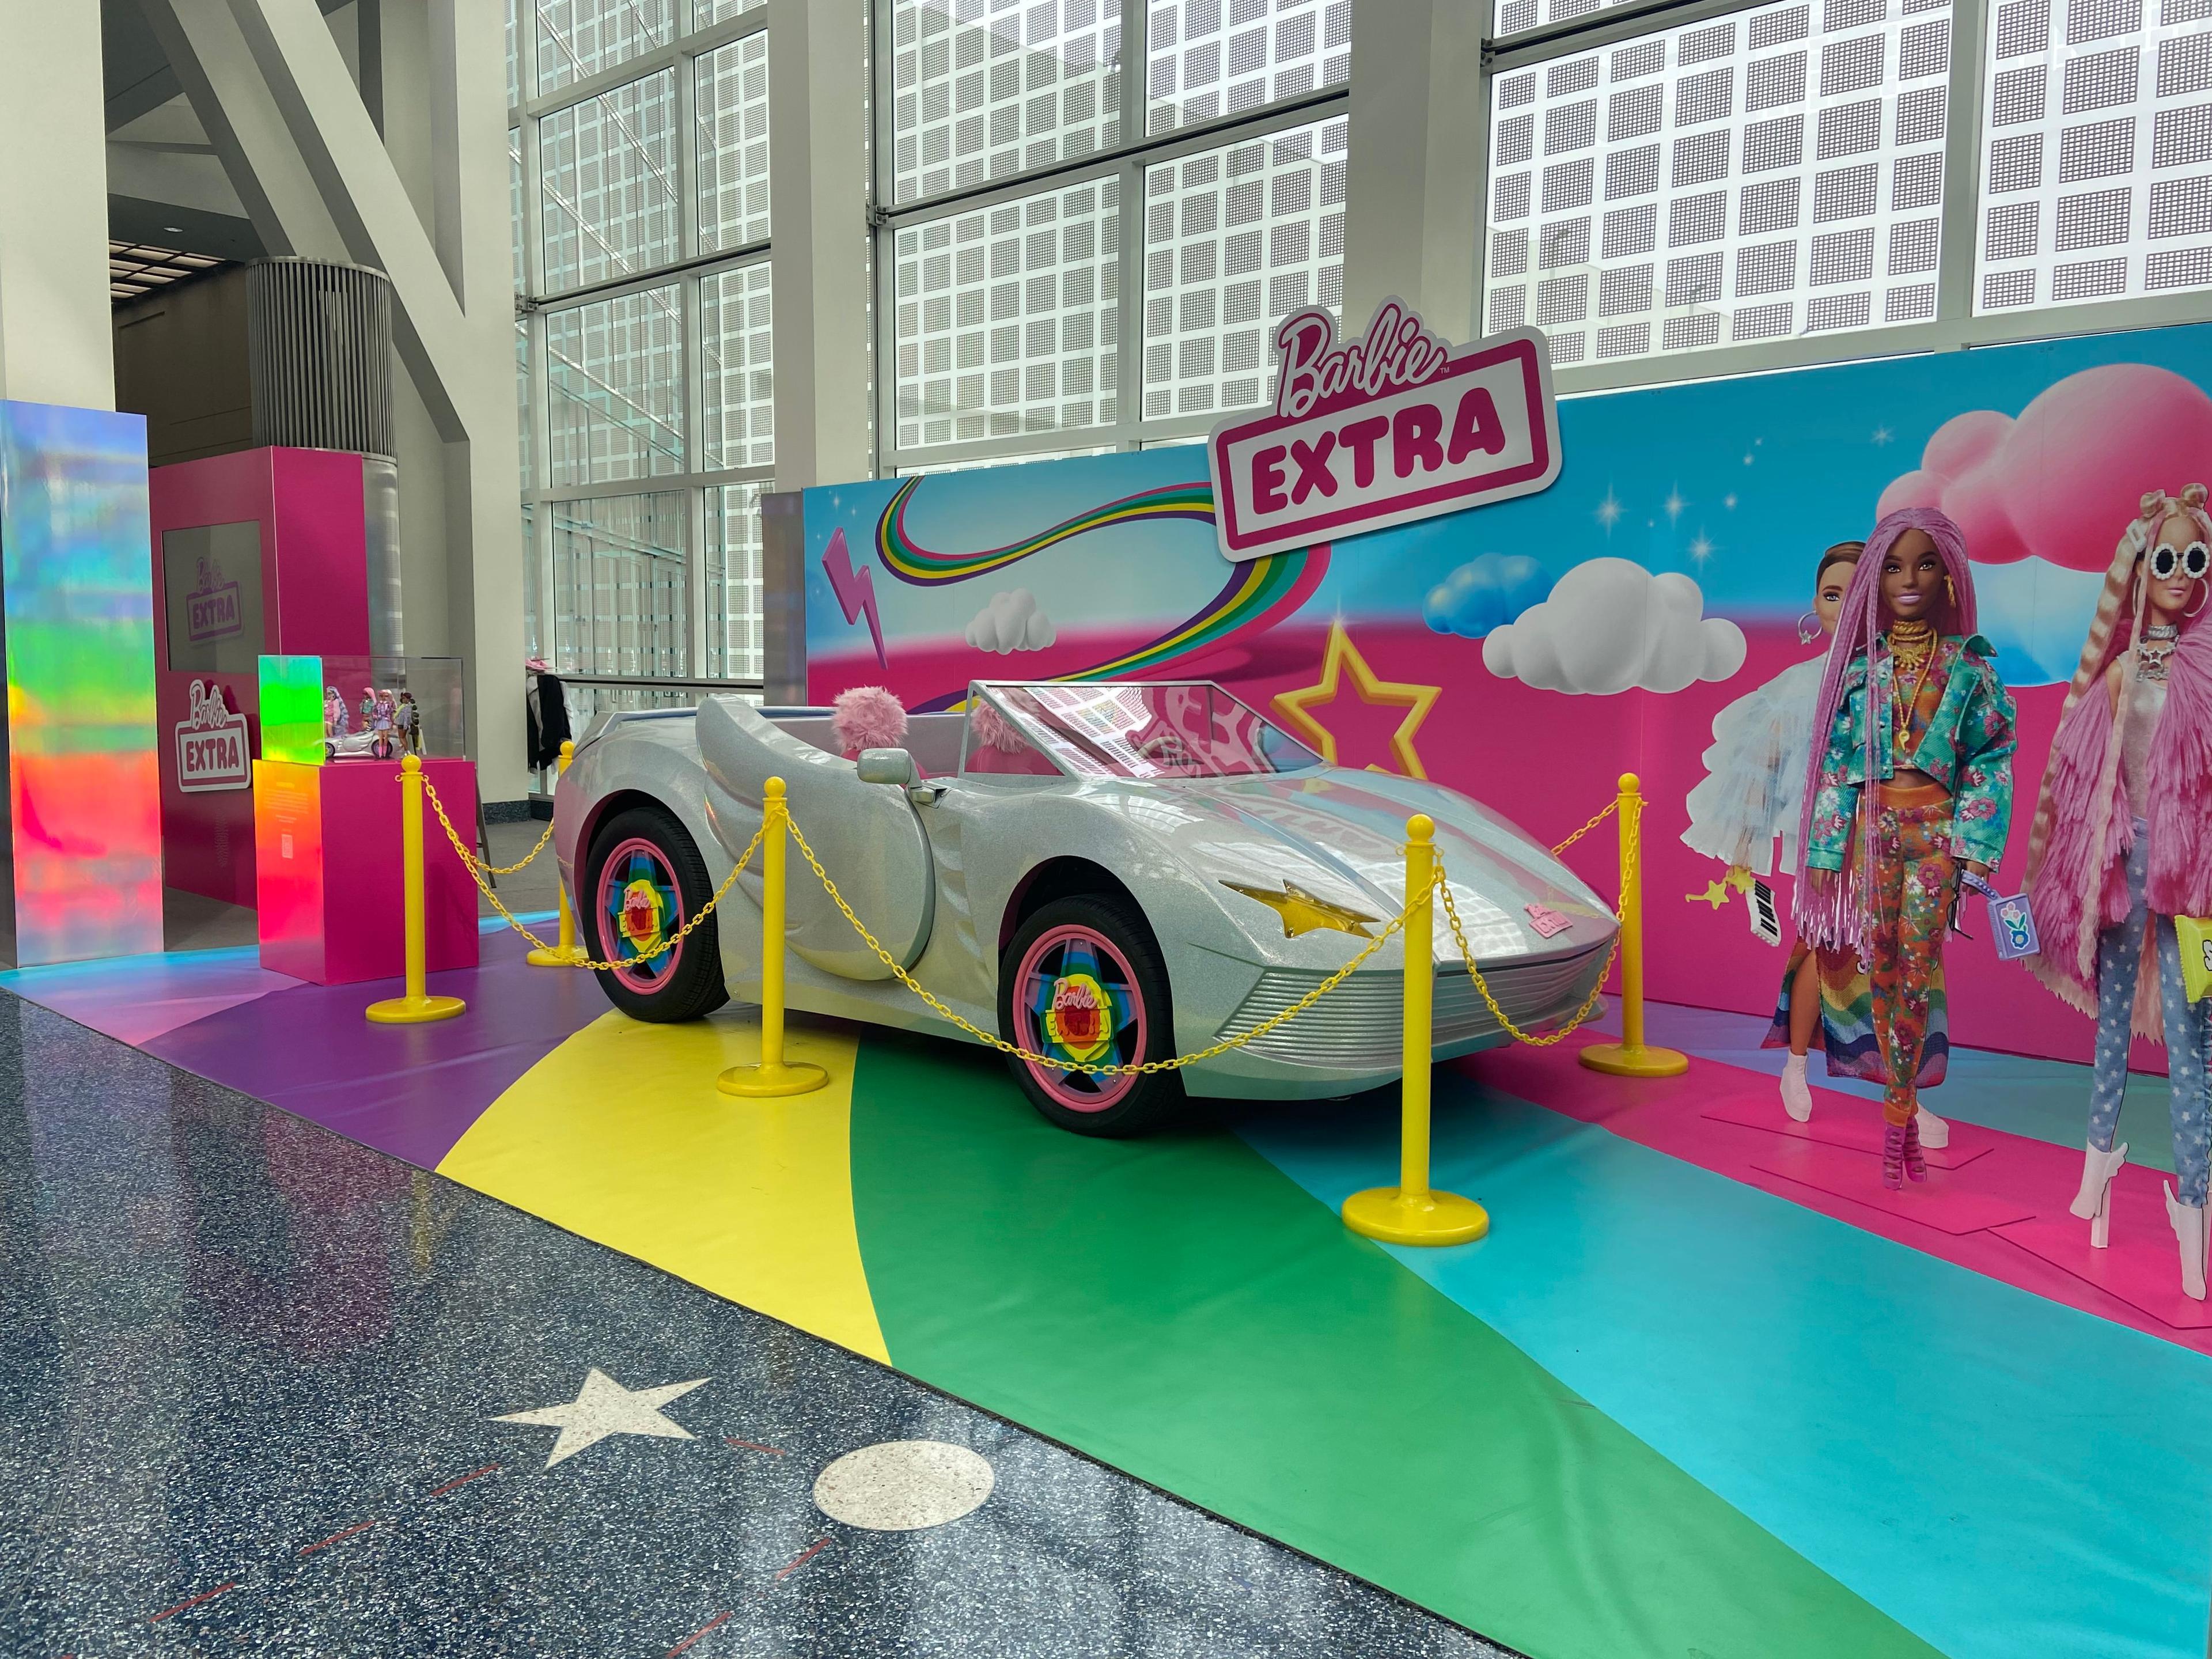 Yes, that's a real-life Barbie car.